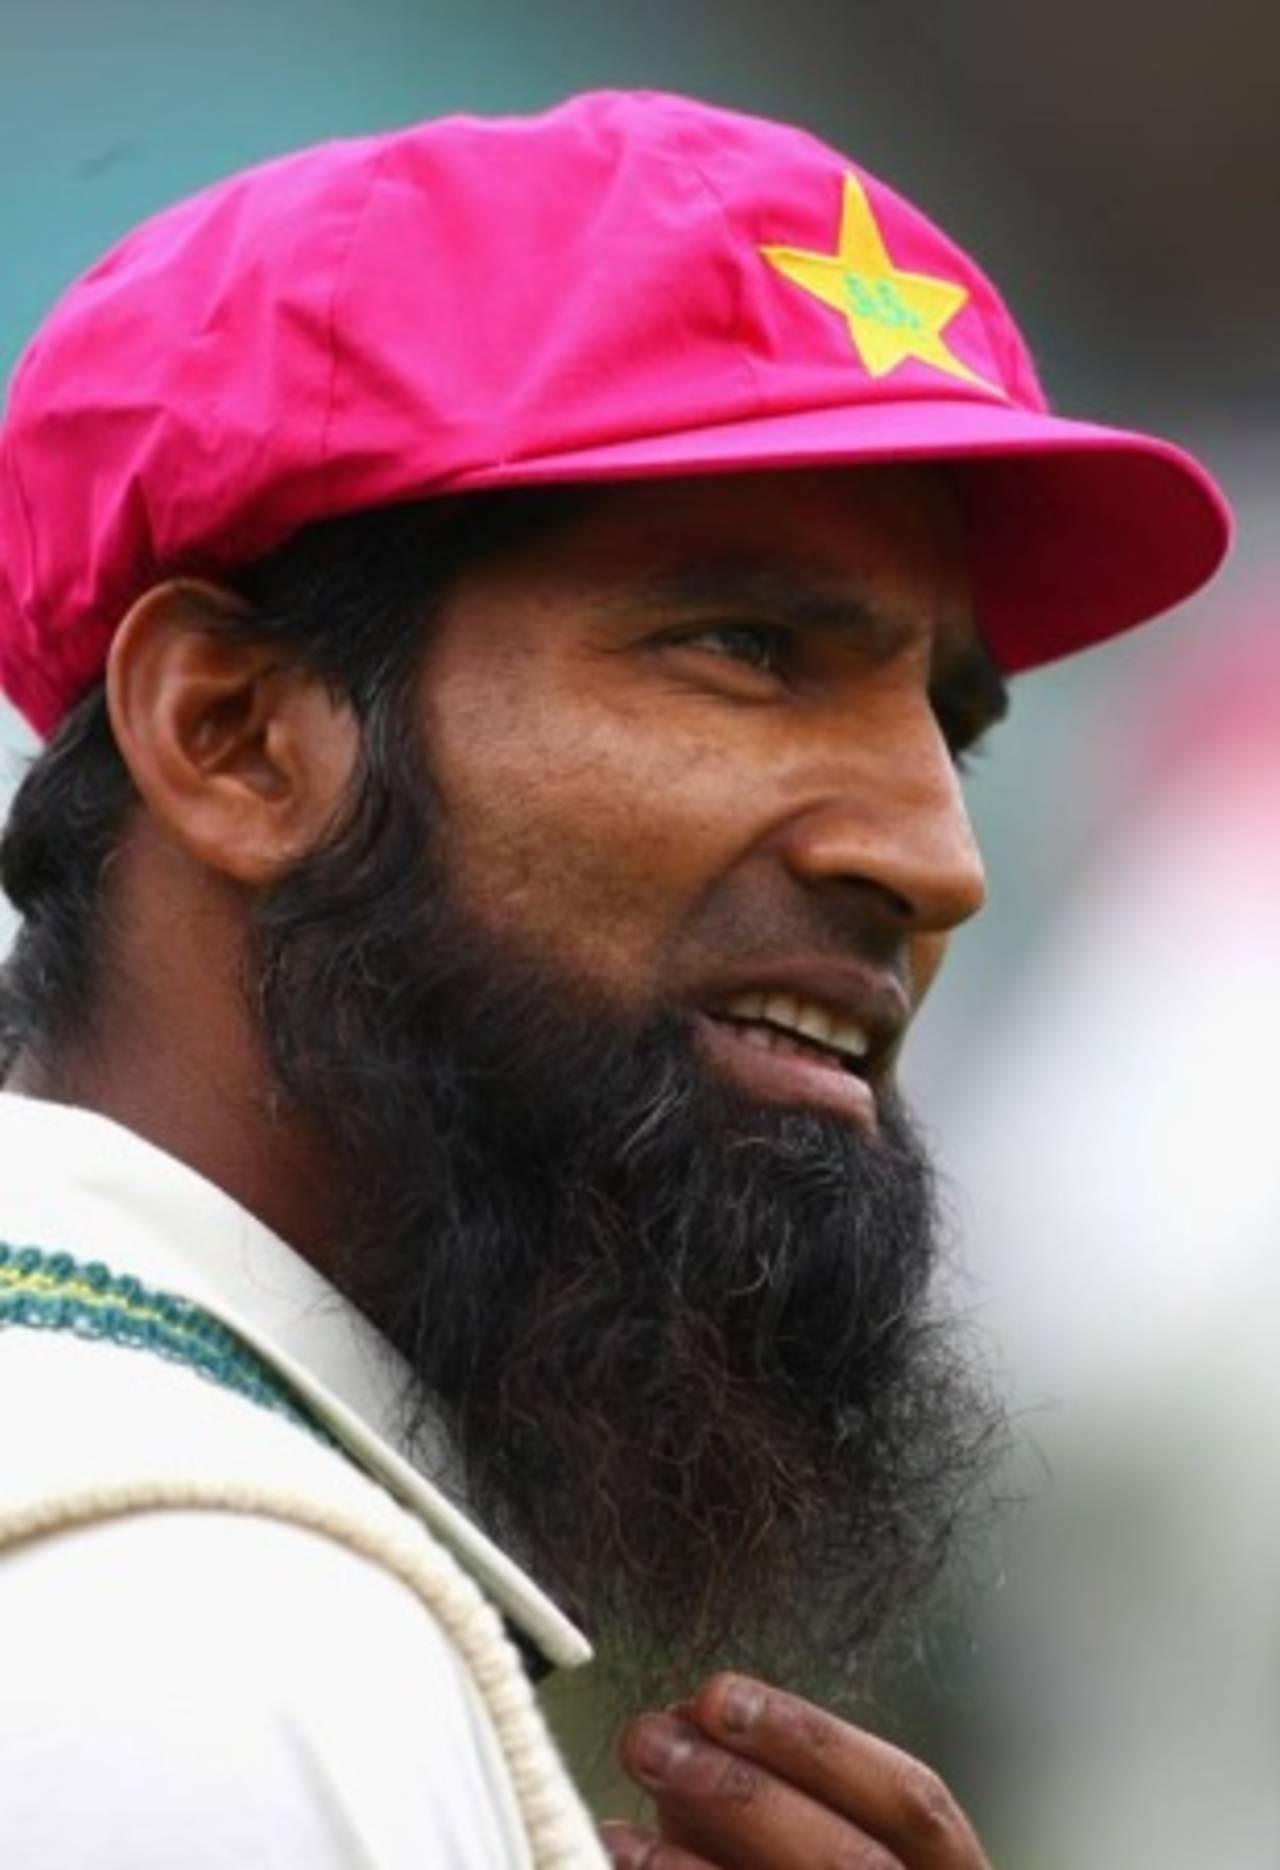 Mohammad Yousuf in a pink cap for the McGrath Foundation, Australia v Pakistan, 2nd Test, Sydney, 1st day, January 3, 2010